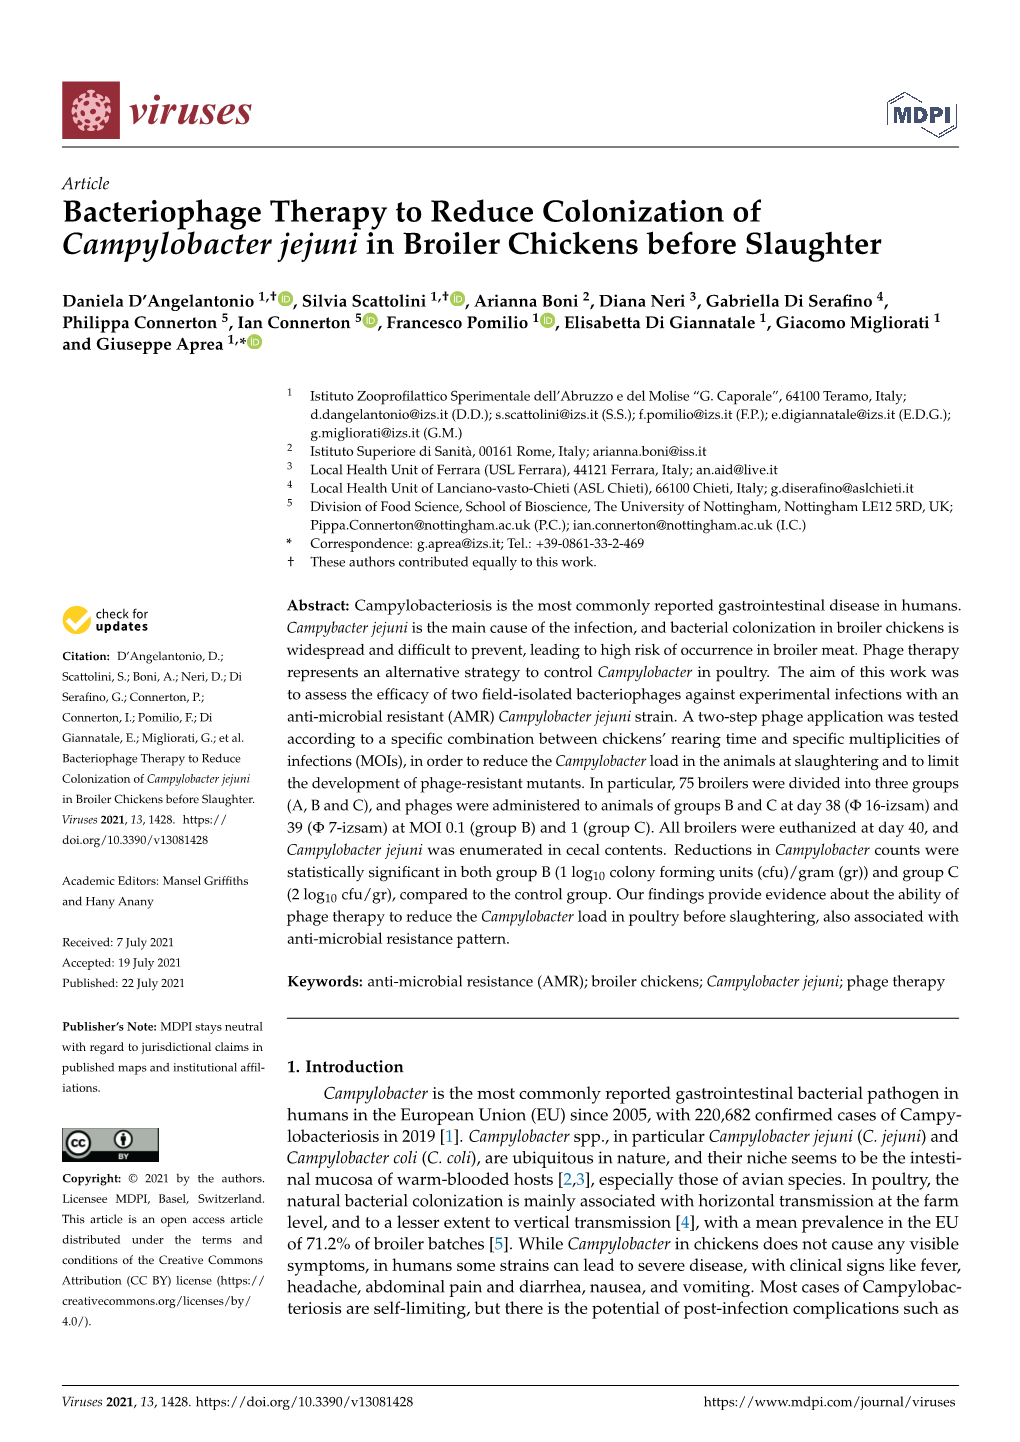 Bacteriophage Therapy to Reduce Colonization of Campylobacter Jejuni in Broiler Chickens Before Slaughter